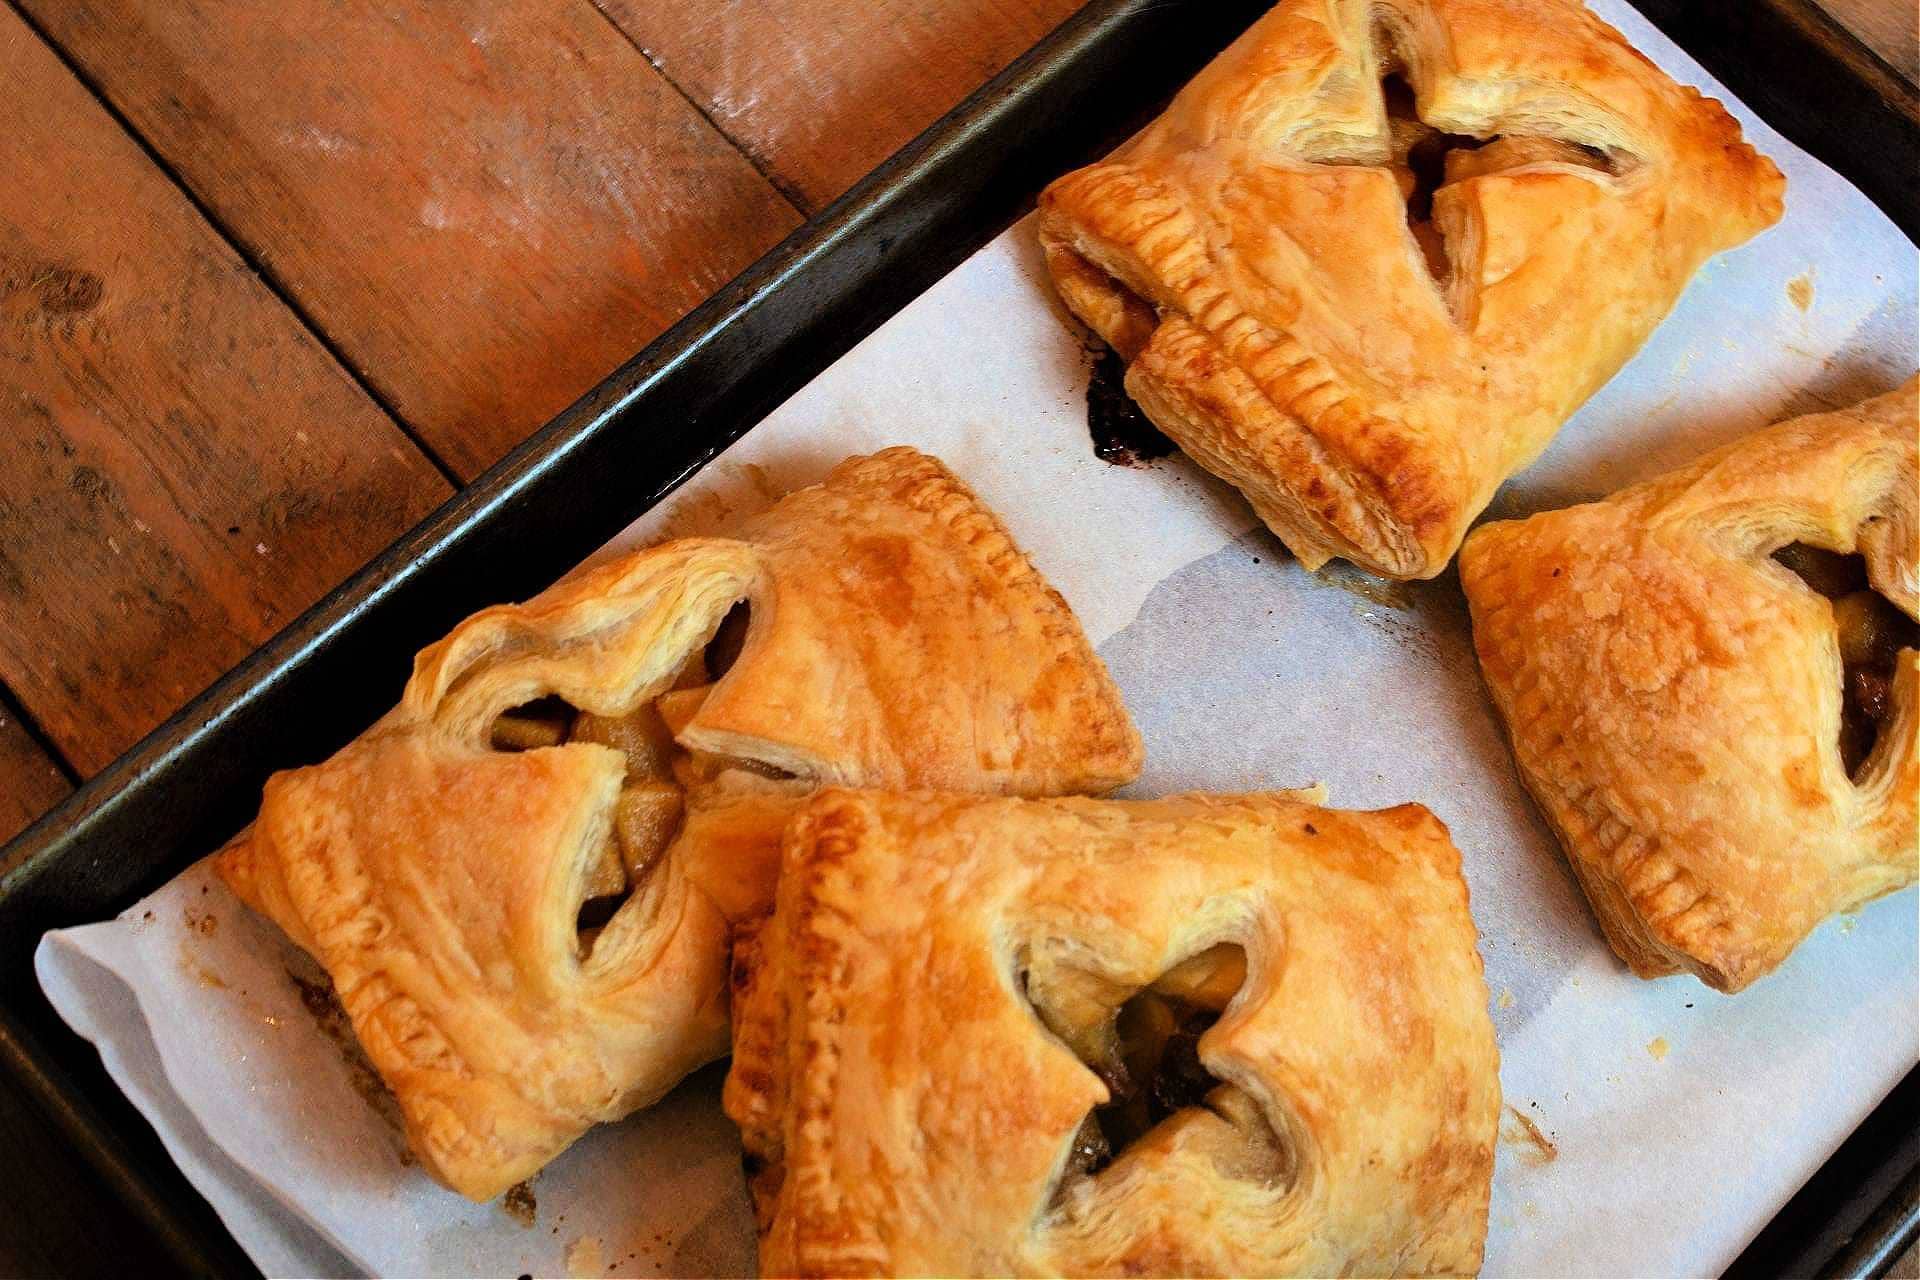 Apple and Date Turnovers